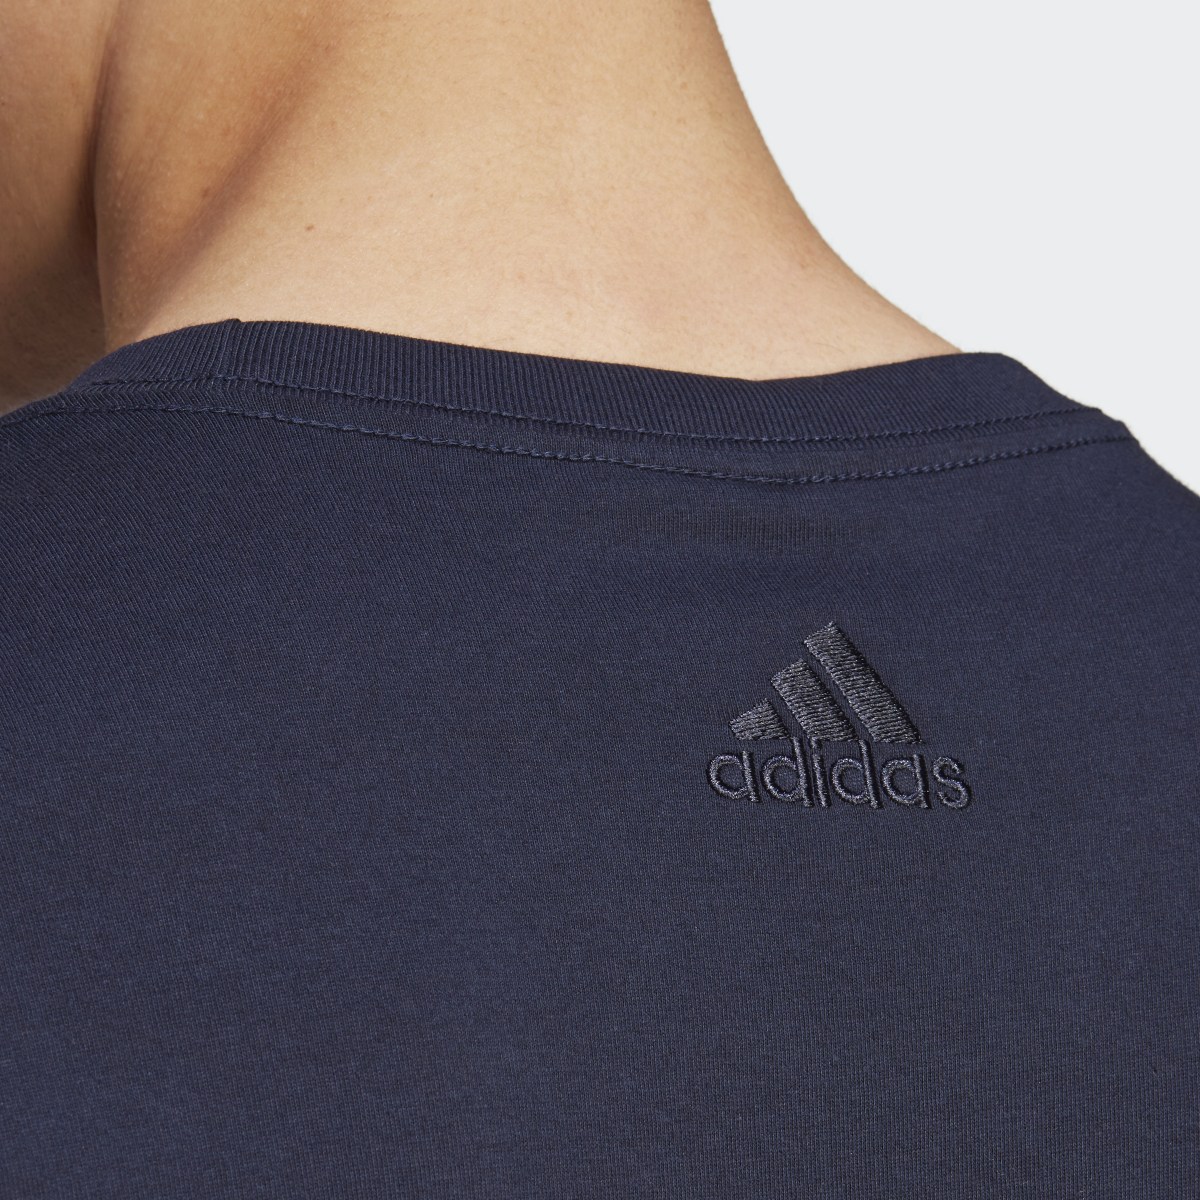 Adidas Essentials Single Jersey Linear Embroidered Logo Tee. 7